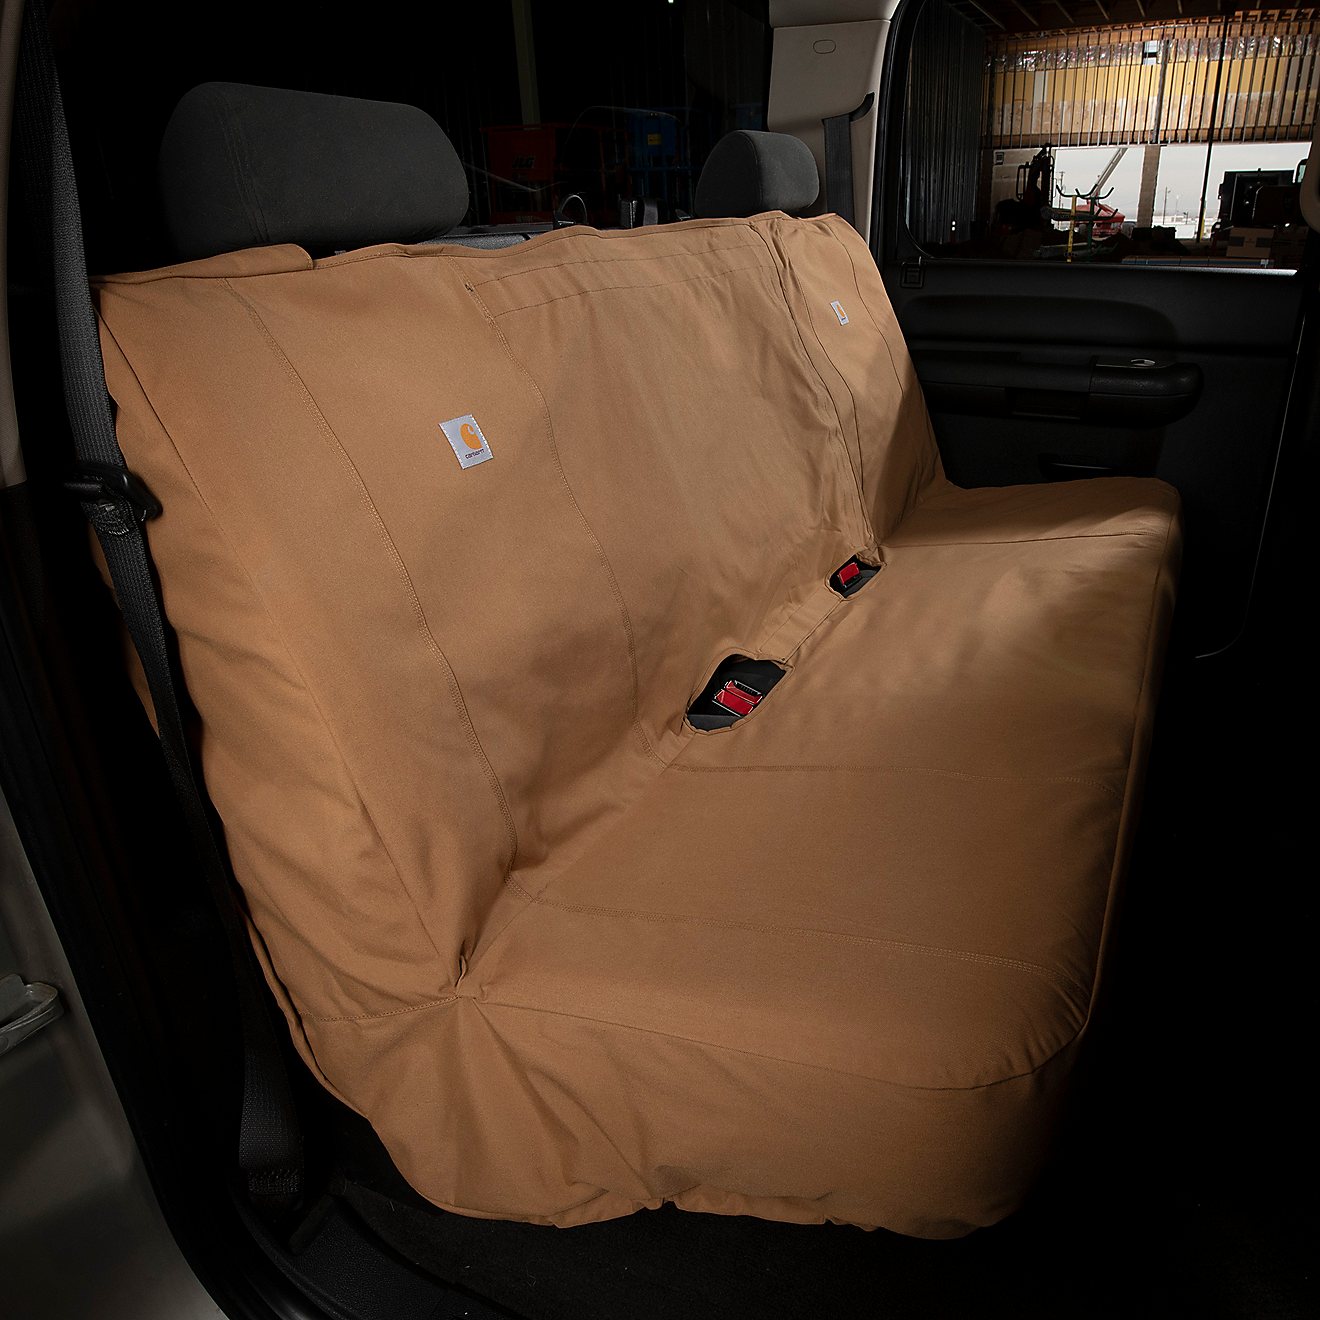 Carhartt Universal Fit Duck Bench Seat Cover Academy - Carhartt Universal Bench Seat Covers